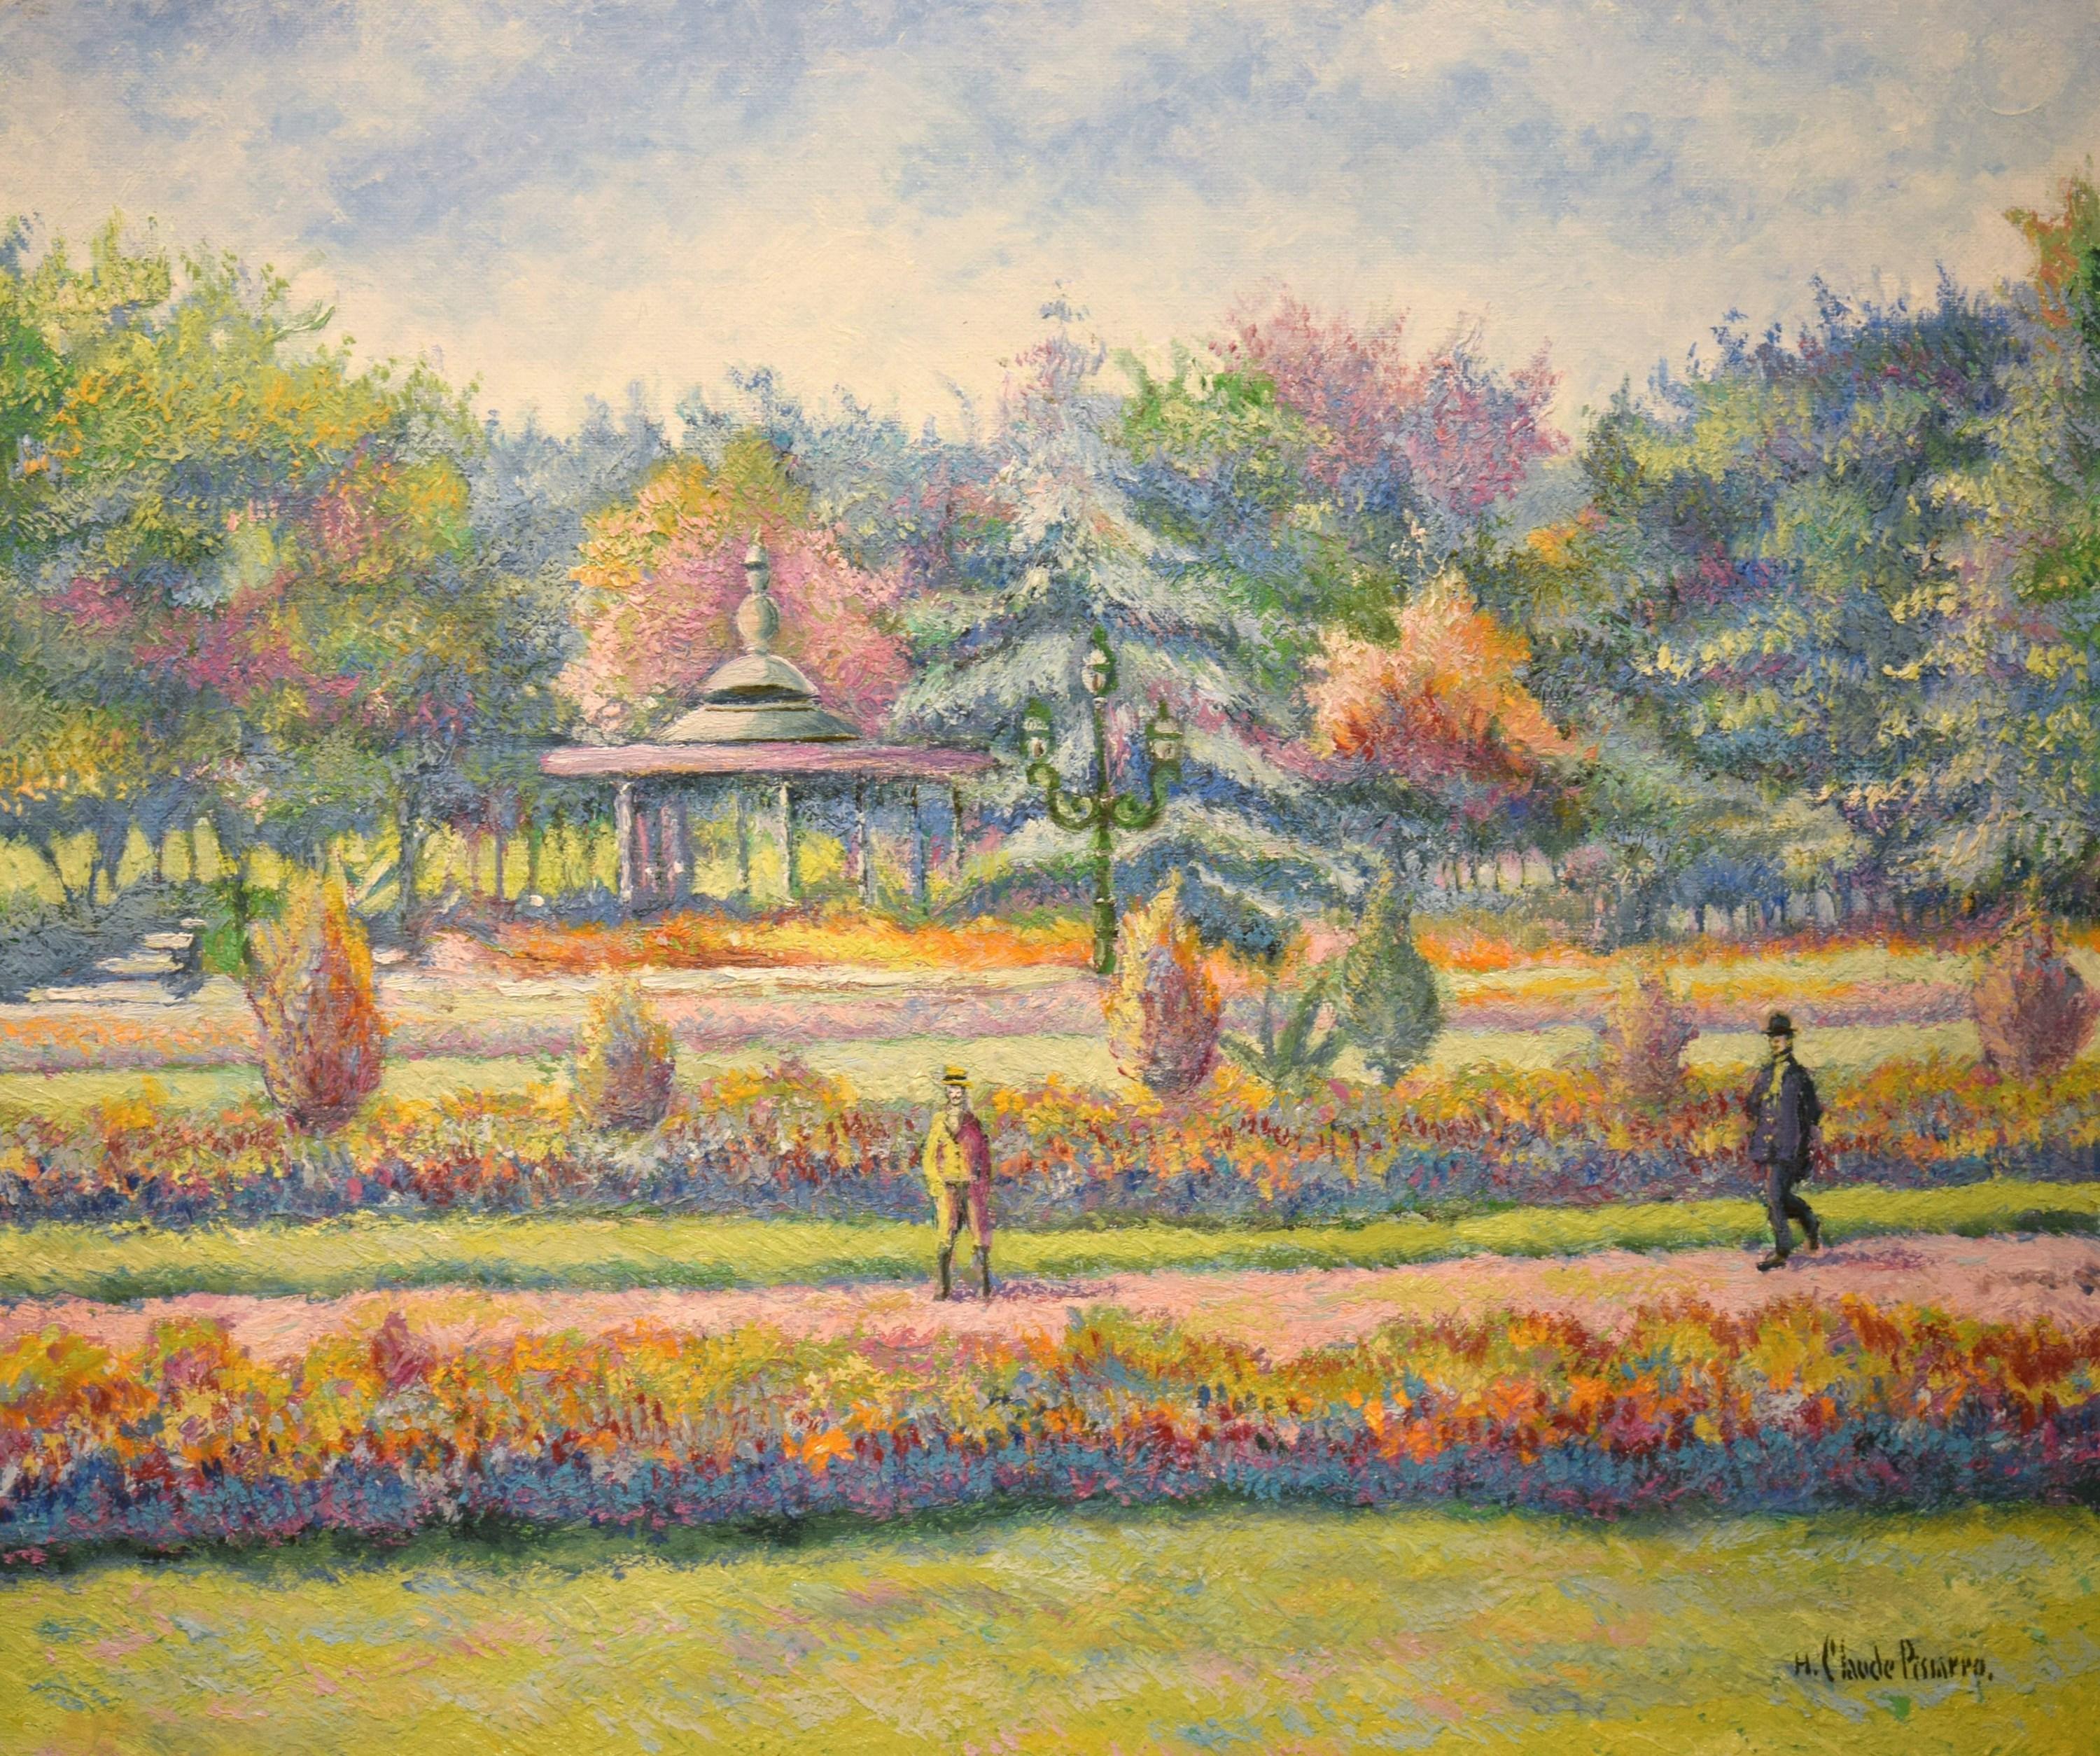 Belle saison au jardin Joudon, Oil on canvas by H. Claude Pissarro
Oil on canvas
46 x 55 cm (18 ¹/₈ x 21 ⁵/₈ inches)
Signed H. Claude Pissarro lower right

This work is accompanied by a certificate of authenticity from the artist.

Artist